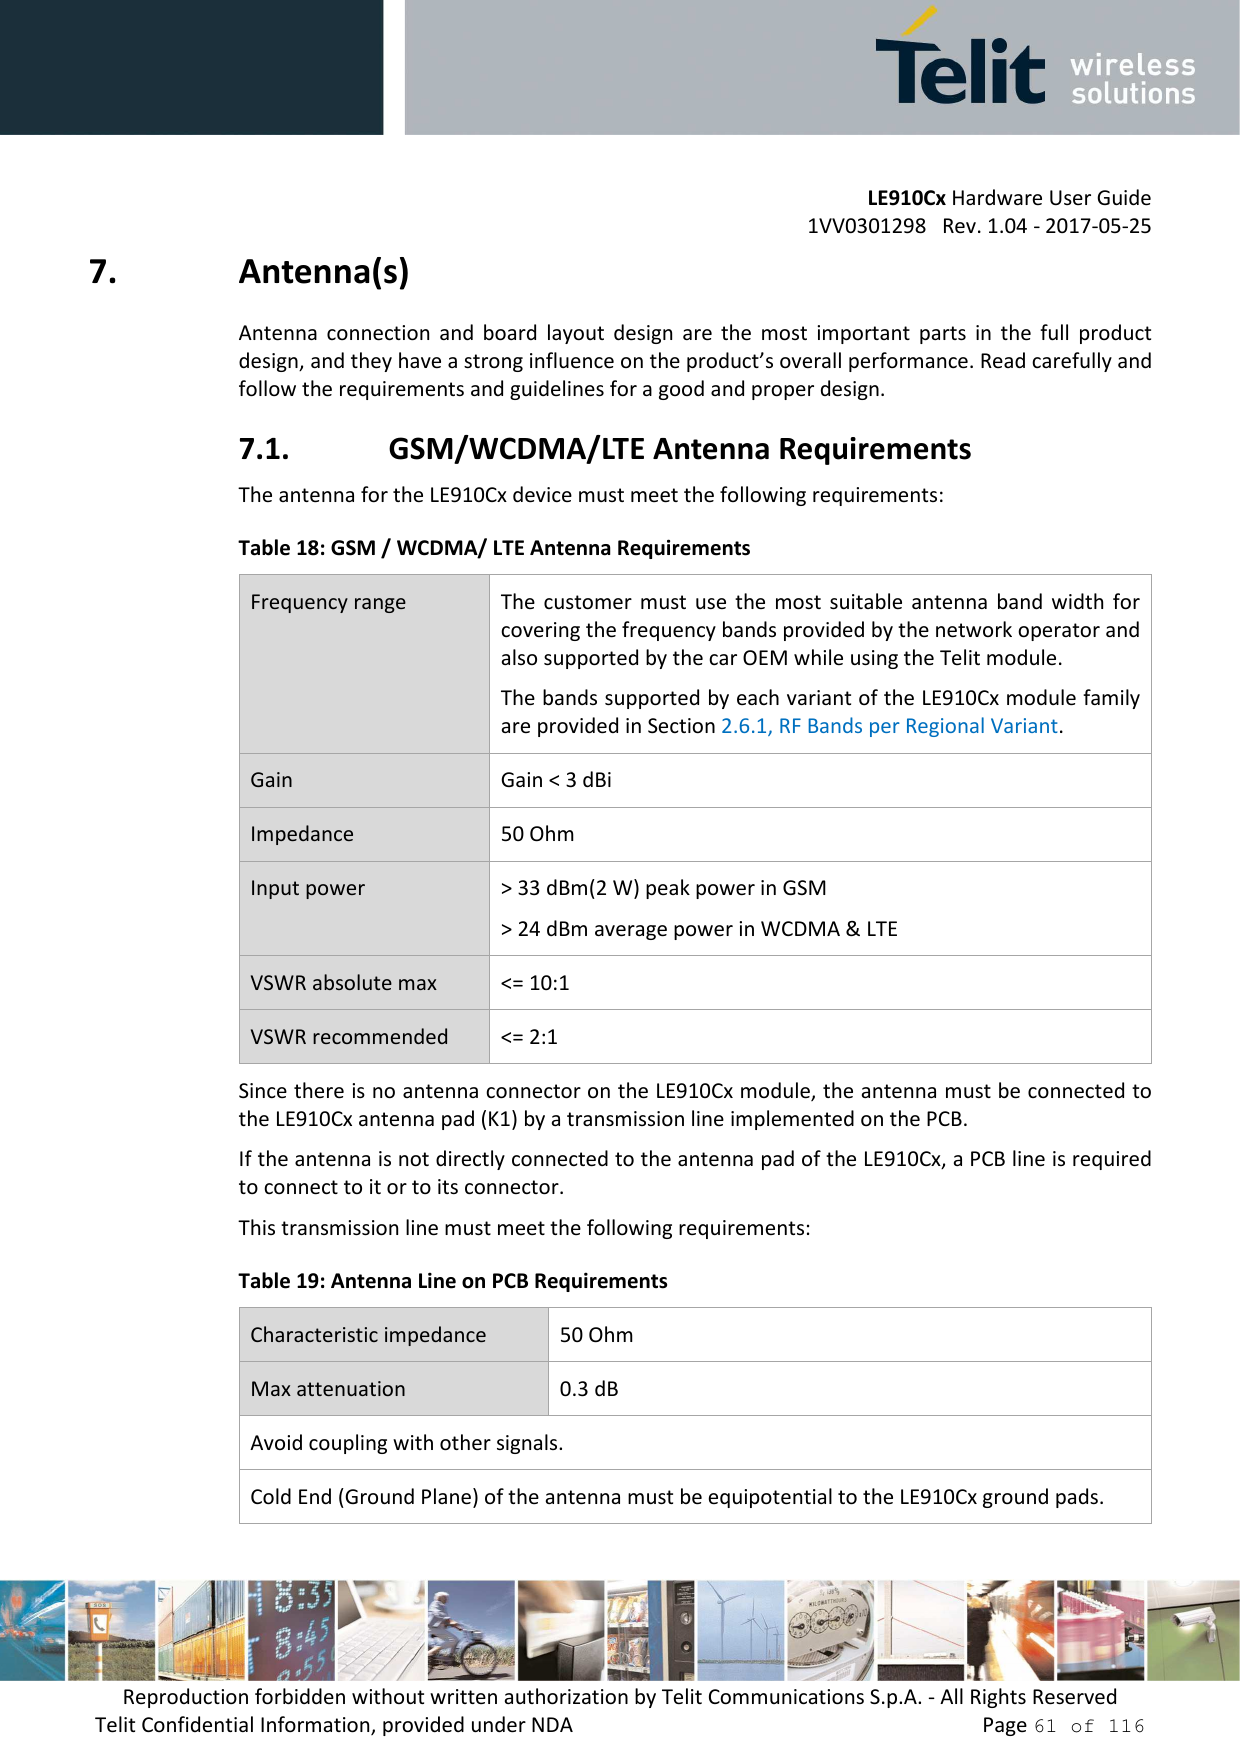         LE910Cx Hardware User Guide 1VV0301298   Rev. 1.04 - 2017-05-25 Reproduction forbidden without written authorization by Telit Communications S.p.A. - All Rights Reserved Telit Confidential Information, provided under NDA                 Page 61 of 116 7. Antenna(s) Antenna  connection  and  board  layout  design  are  the  most  important  parts  in  the  full  product design, and they have a strong influence on the product’s overall performance. Read carefully and follow the requirements and guidelines for a good and proper design. 7.1. GSM/WCDMA/LTE Antenna Requirements The antenna for the LE910Cx device must meet the following requirements: Table 18: GSM / WCDMA/ LTE Antenna Requirements Frequency range  The  customer must use  the  most  suitable  antenna band width  for covering the frequency bands provided by the network operator and also supported by the car OEM while using the Telit module.  The bands supported by each variant of the LE910Cx module family are provided in Section 2.6.1, RF Bands per Regional Variant. Gain  Gain &lt; 3 dBi Impedance  50 Ohm Input power  &gt; 33 dBm(2 W) peak power in GSM &gt; 24 dBm average power in WCDMA &amp; LTE VSWR absolute max  &lt;= 10:1 VSWR recommended  &lt;= 2:1 Since there is no antenna connector on the LE910Cx module, the antenna must be connected to the LE910Cx antenna pad (K1) by a transmission line implemented on the PCB. If the antenna is not directly connected to the antenna pad of the LE910Cx, a PCB line is required to connect to it or to its connector. This transmission line must meet the following requirements: Table 19: Antenna Line on PCB Requirements Characteristic impedance  50 Ohm Max attenuation  0.3 dB Avoid coupling with other signals. Cold End (Ground Plane) of the antenna must be equipotential to the LE910Cx ground pads. 